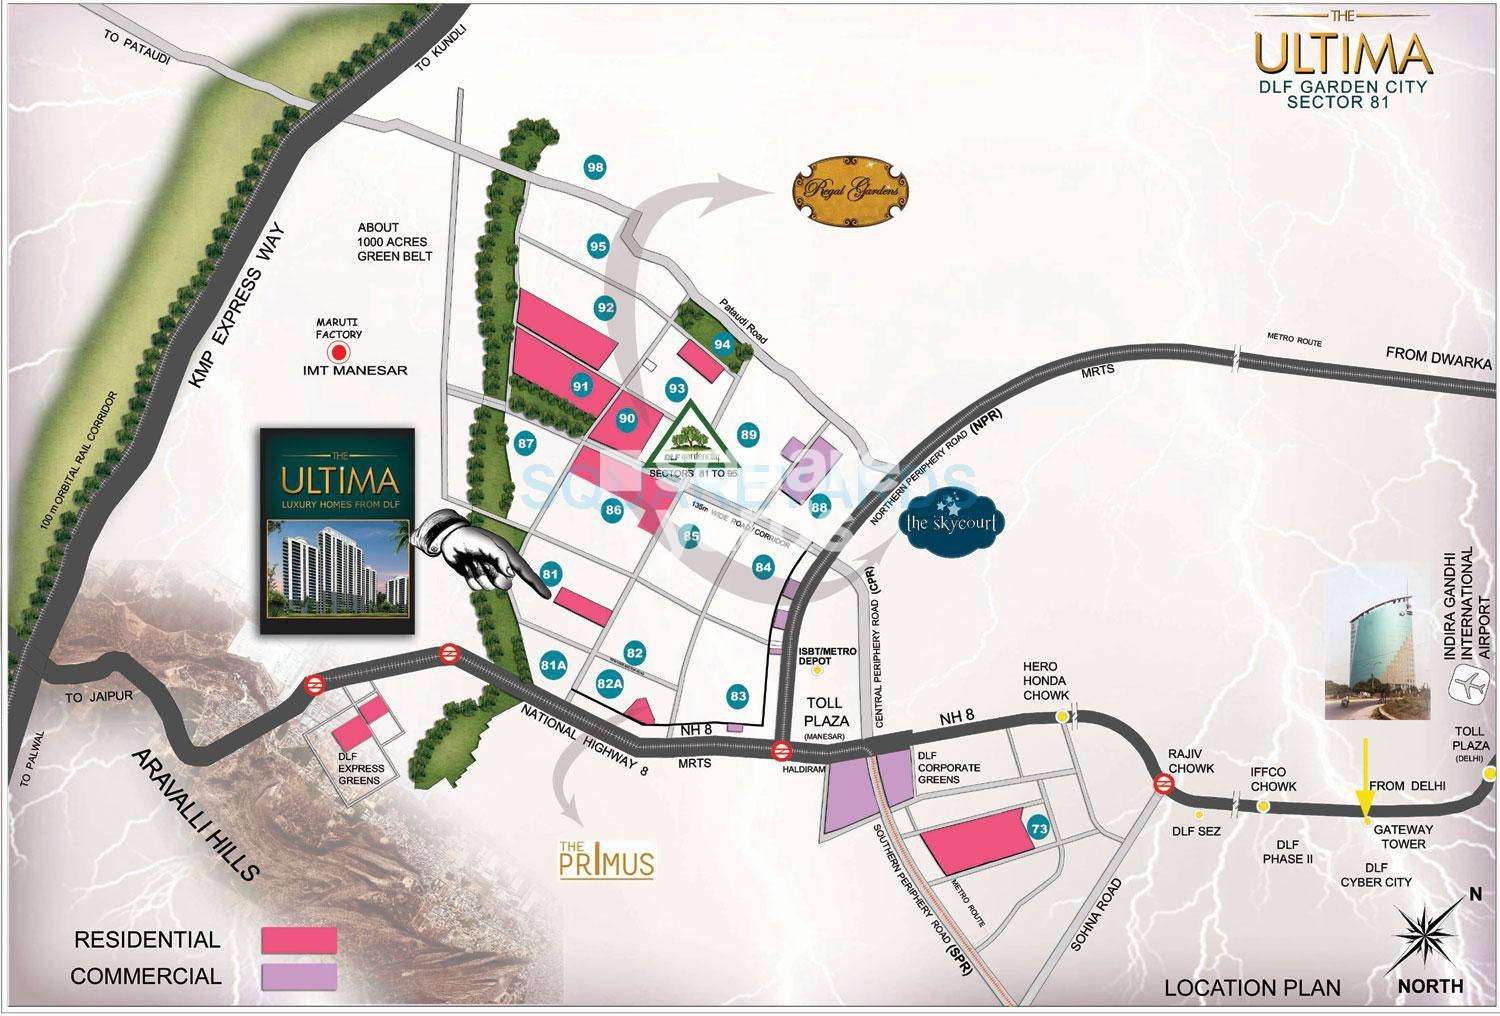 dlf the ultima location image1